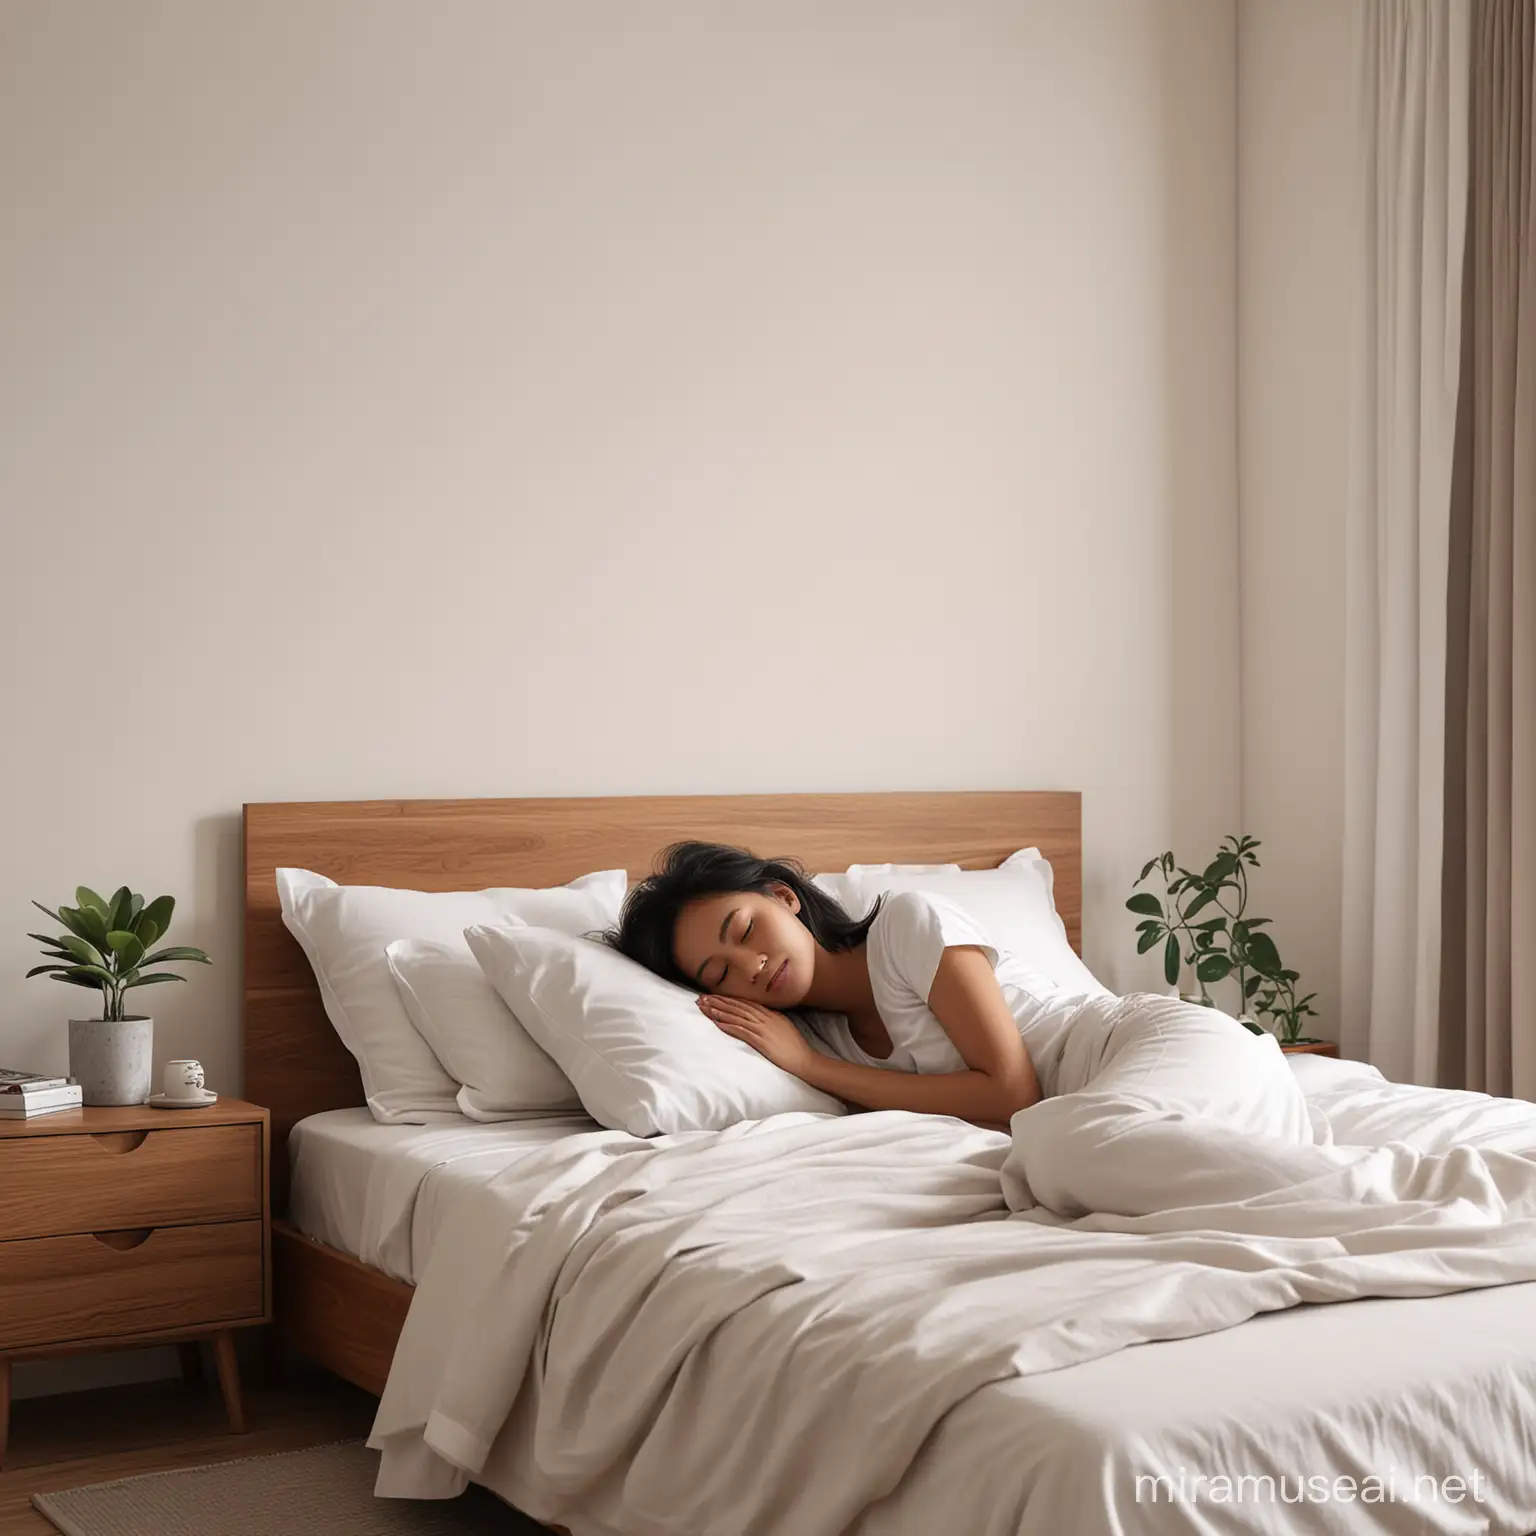 realistic, HD, young Indonesian girl, sleeping comfortably in a neat and minimalist bedroom
